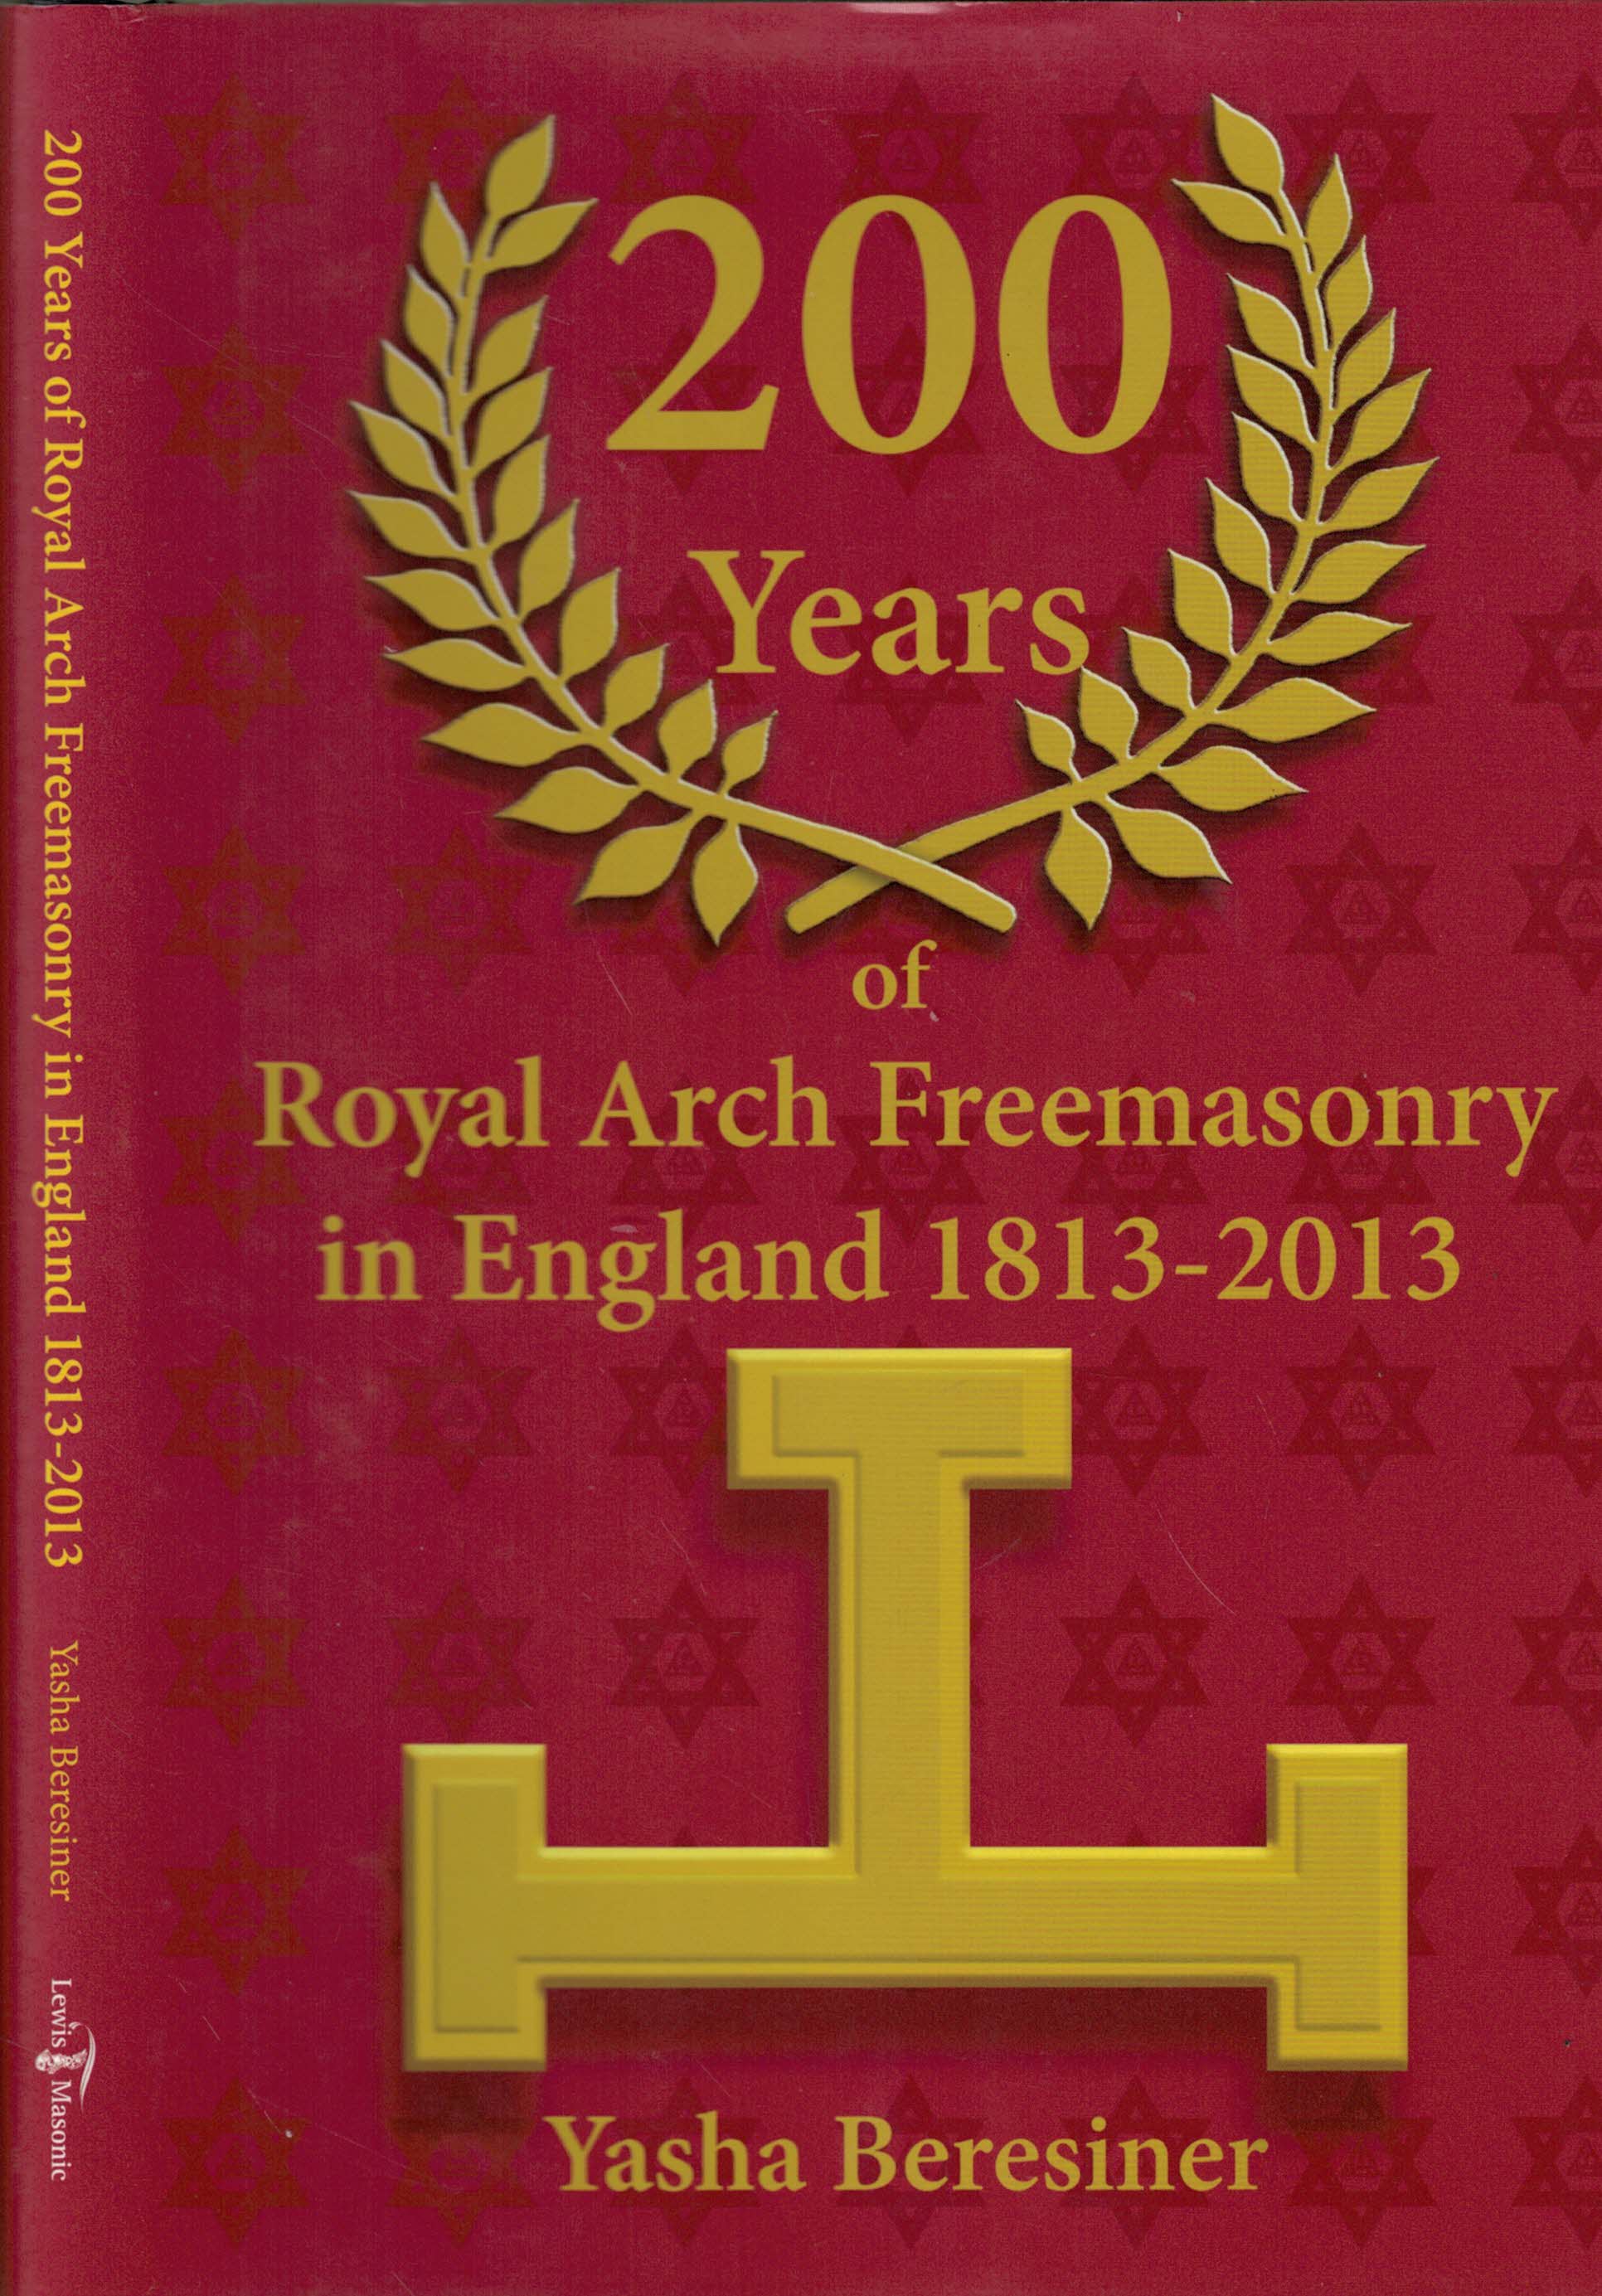 200 Years of Royal Arch Freemasonry in England 1813-2013. A Compendium of the Order.